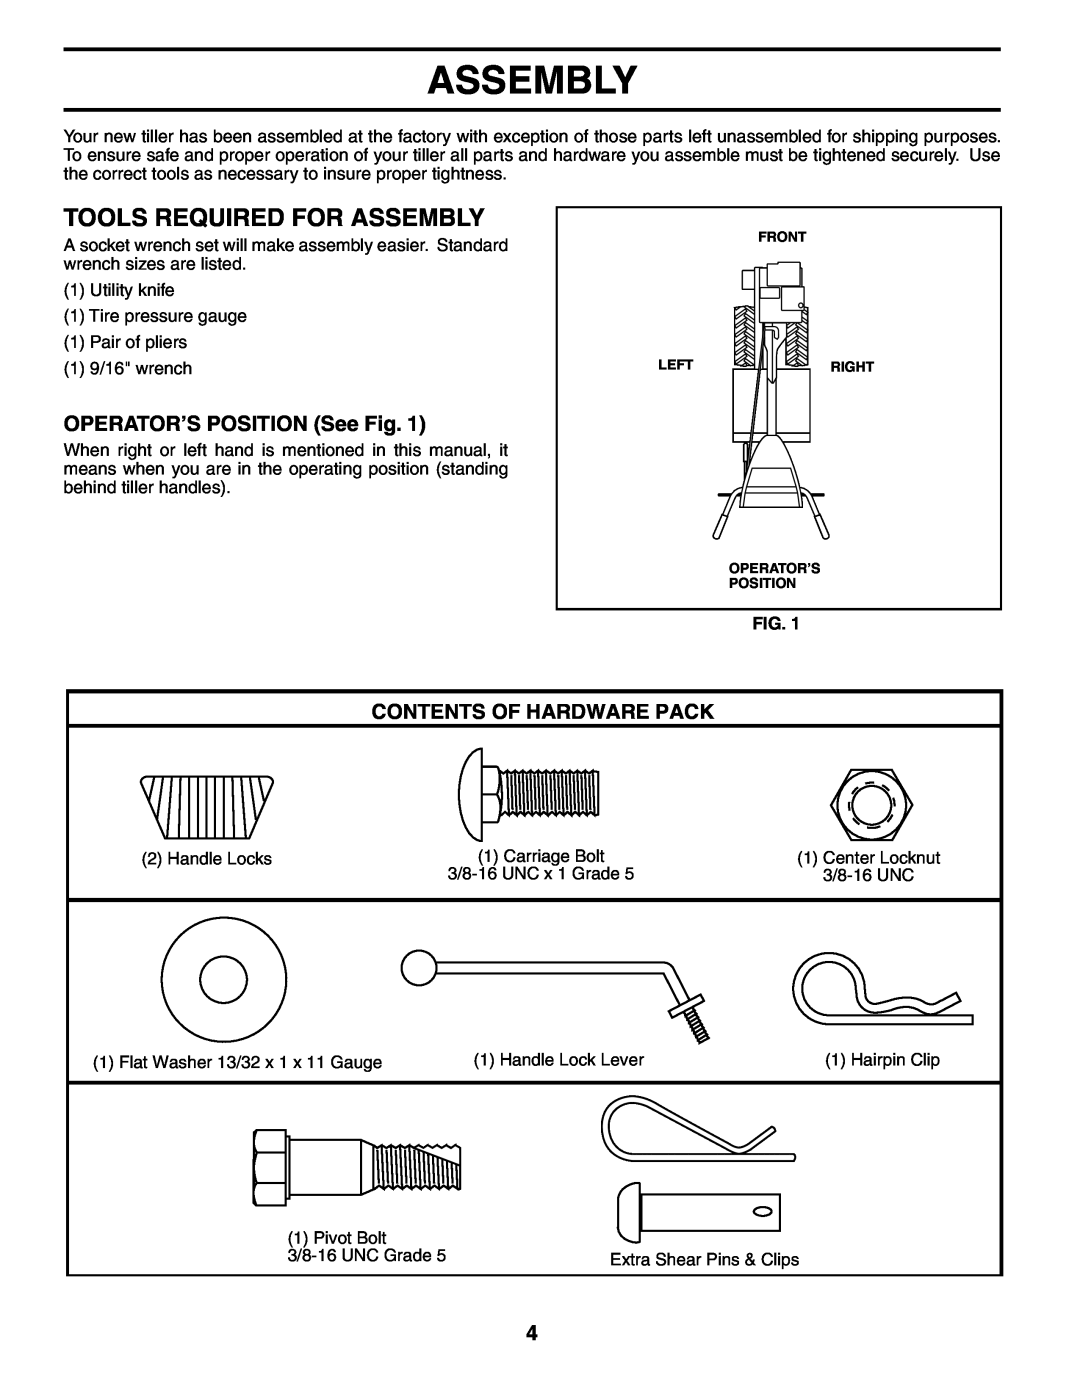 Poulan PRRT65C owner manual Tools Required For Assembly, OPERATOR’S POSITION See Fig, Contents Of Hardware Pack 